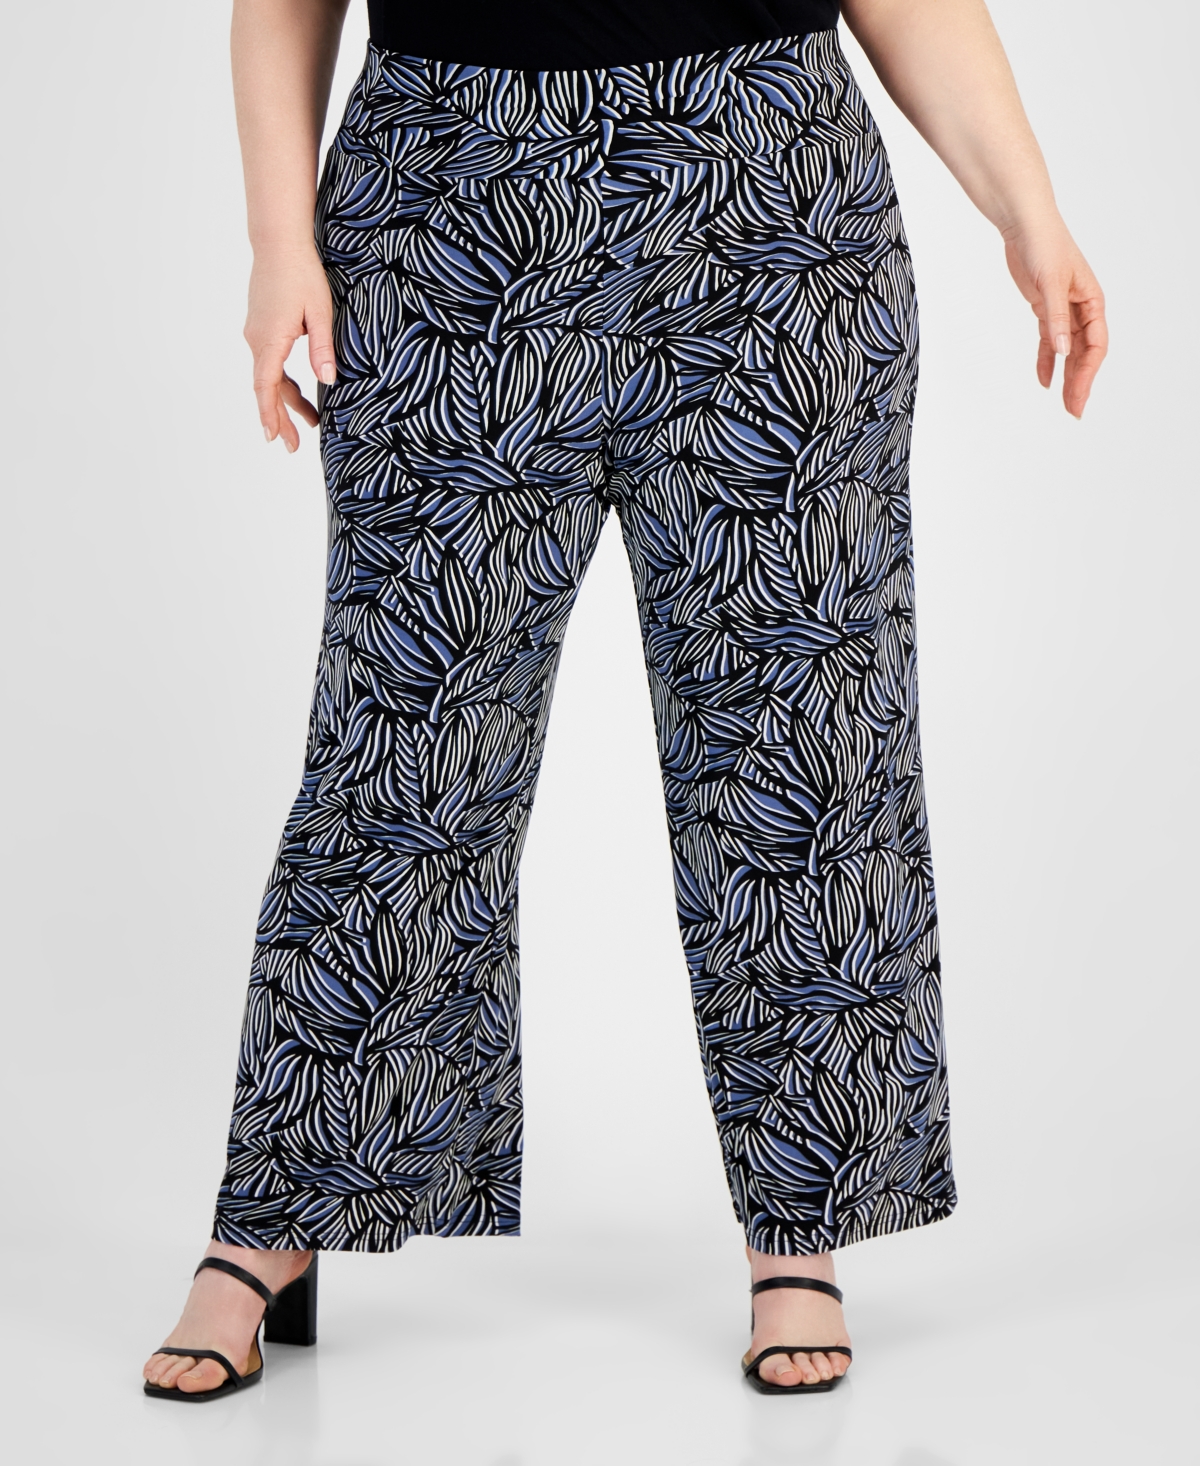 Plus Size High-Rise Pull-On Wide-Leg Pants - Blue Jay/Anne Black